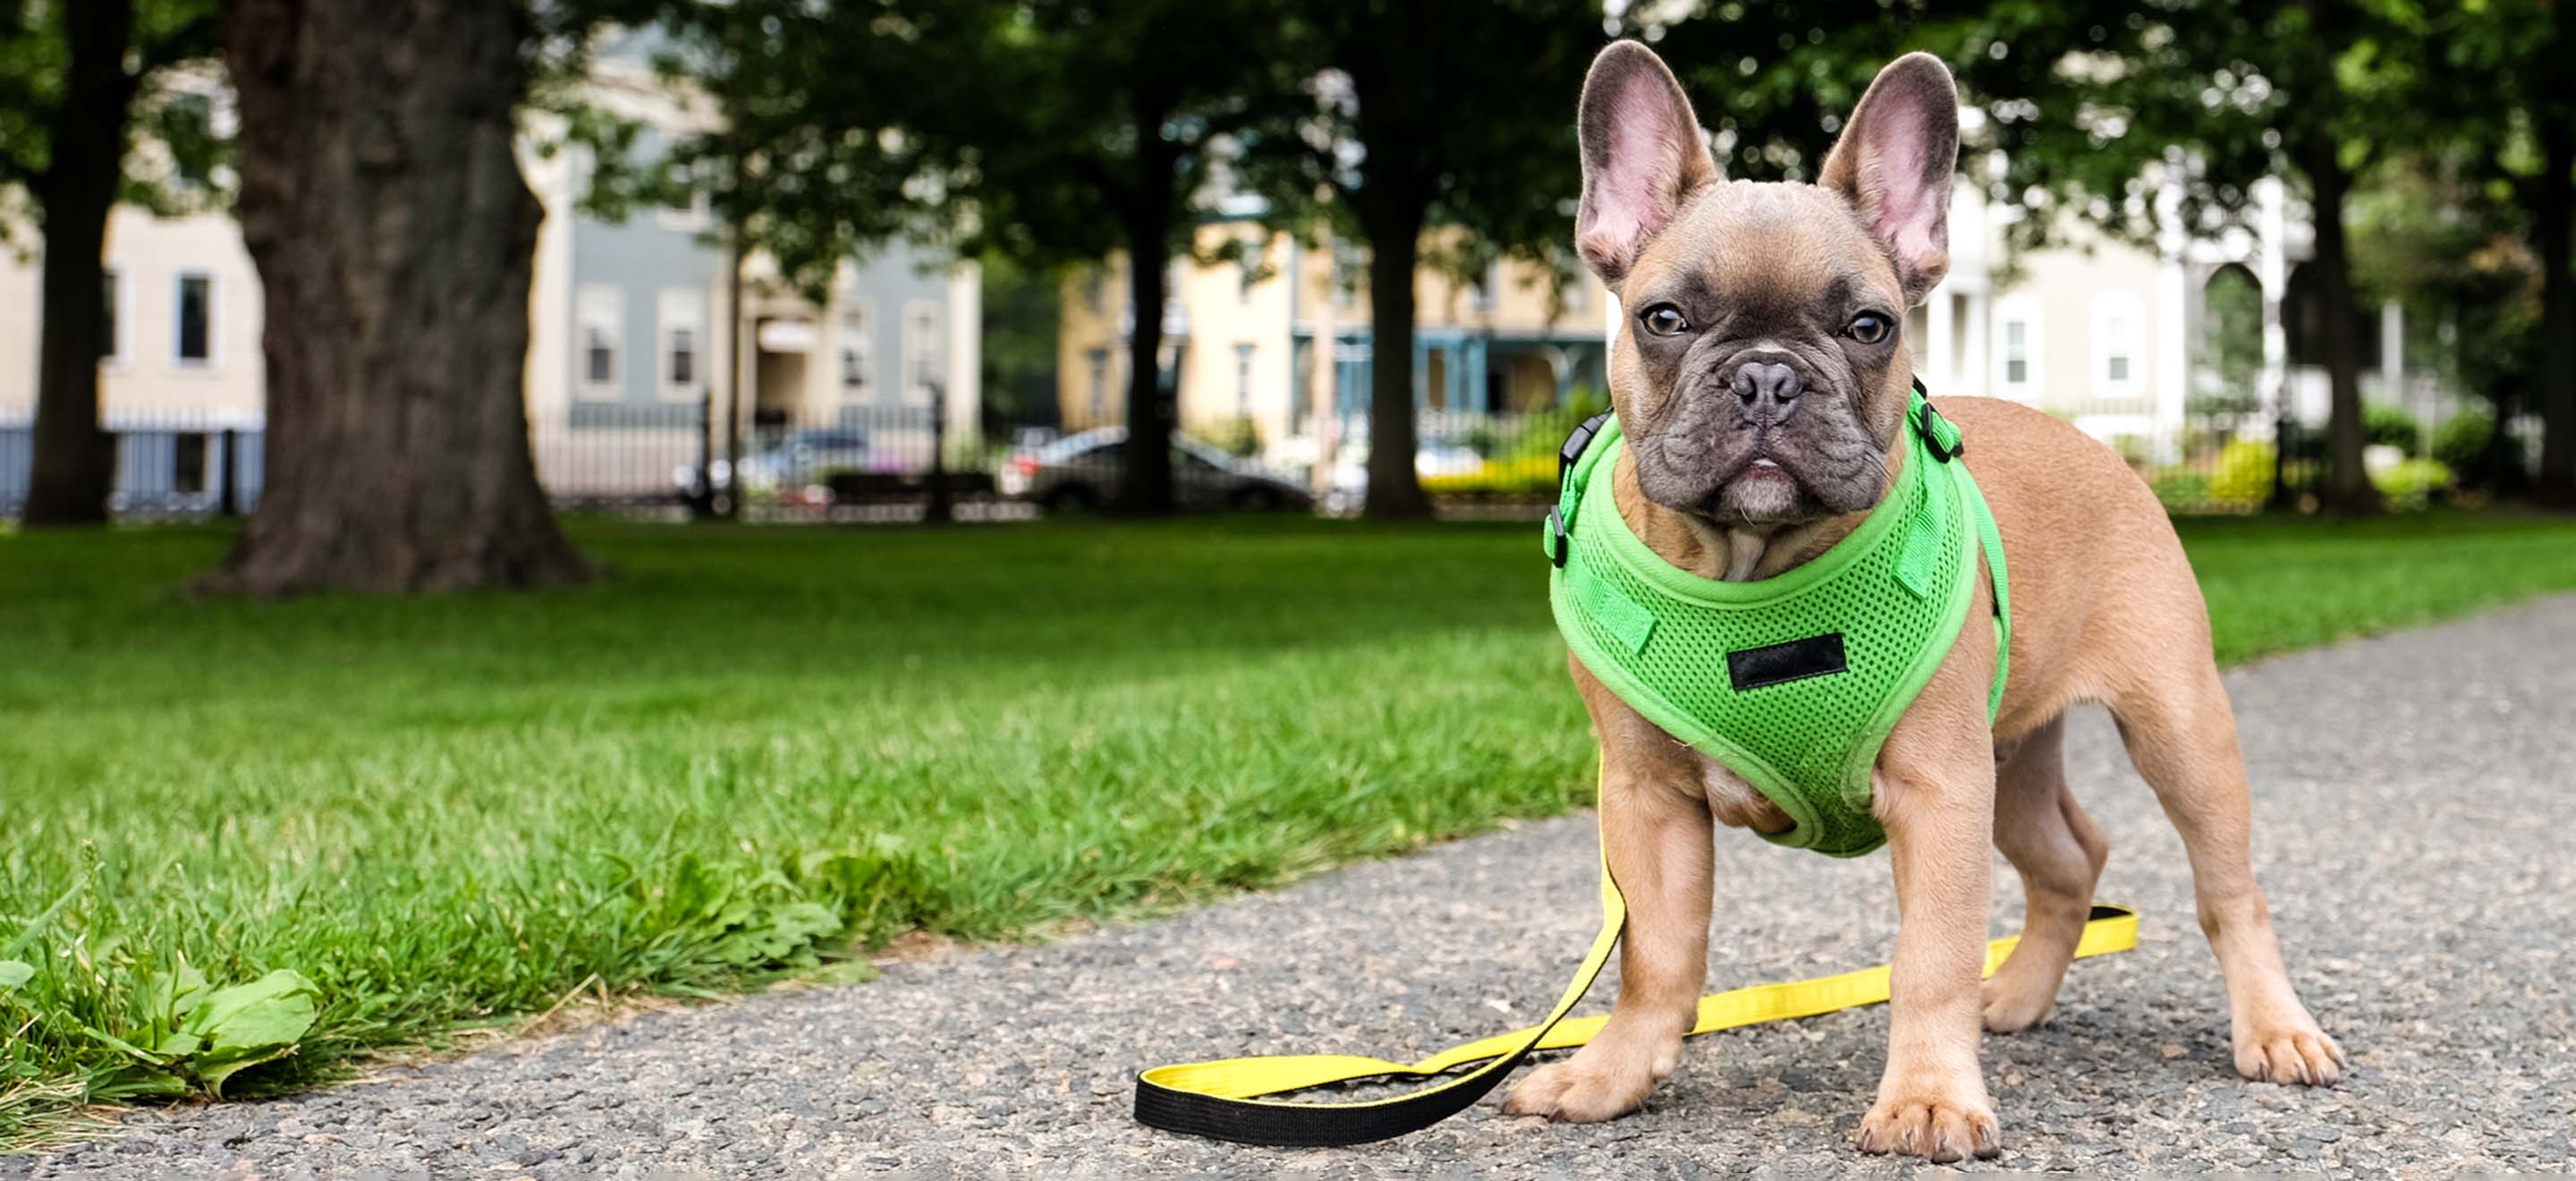 Tan French Bulldog wearing a neon green harness and yellow leash on a walk through the park image